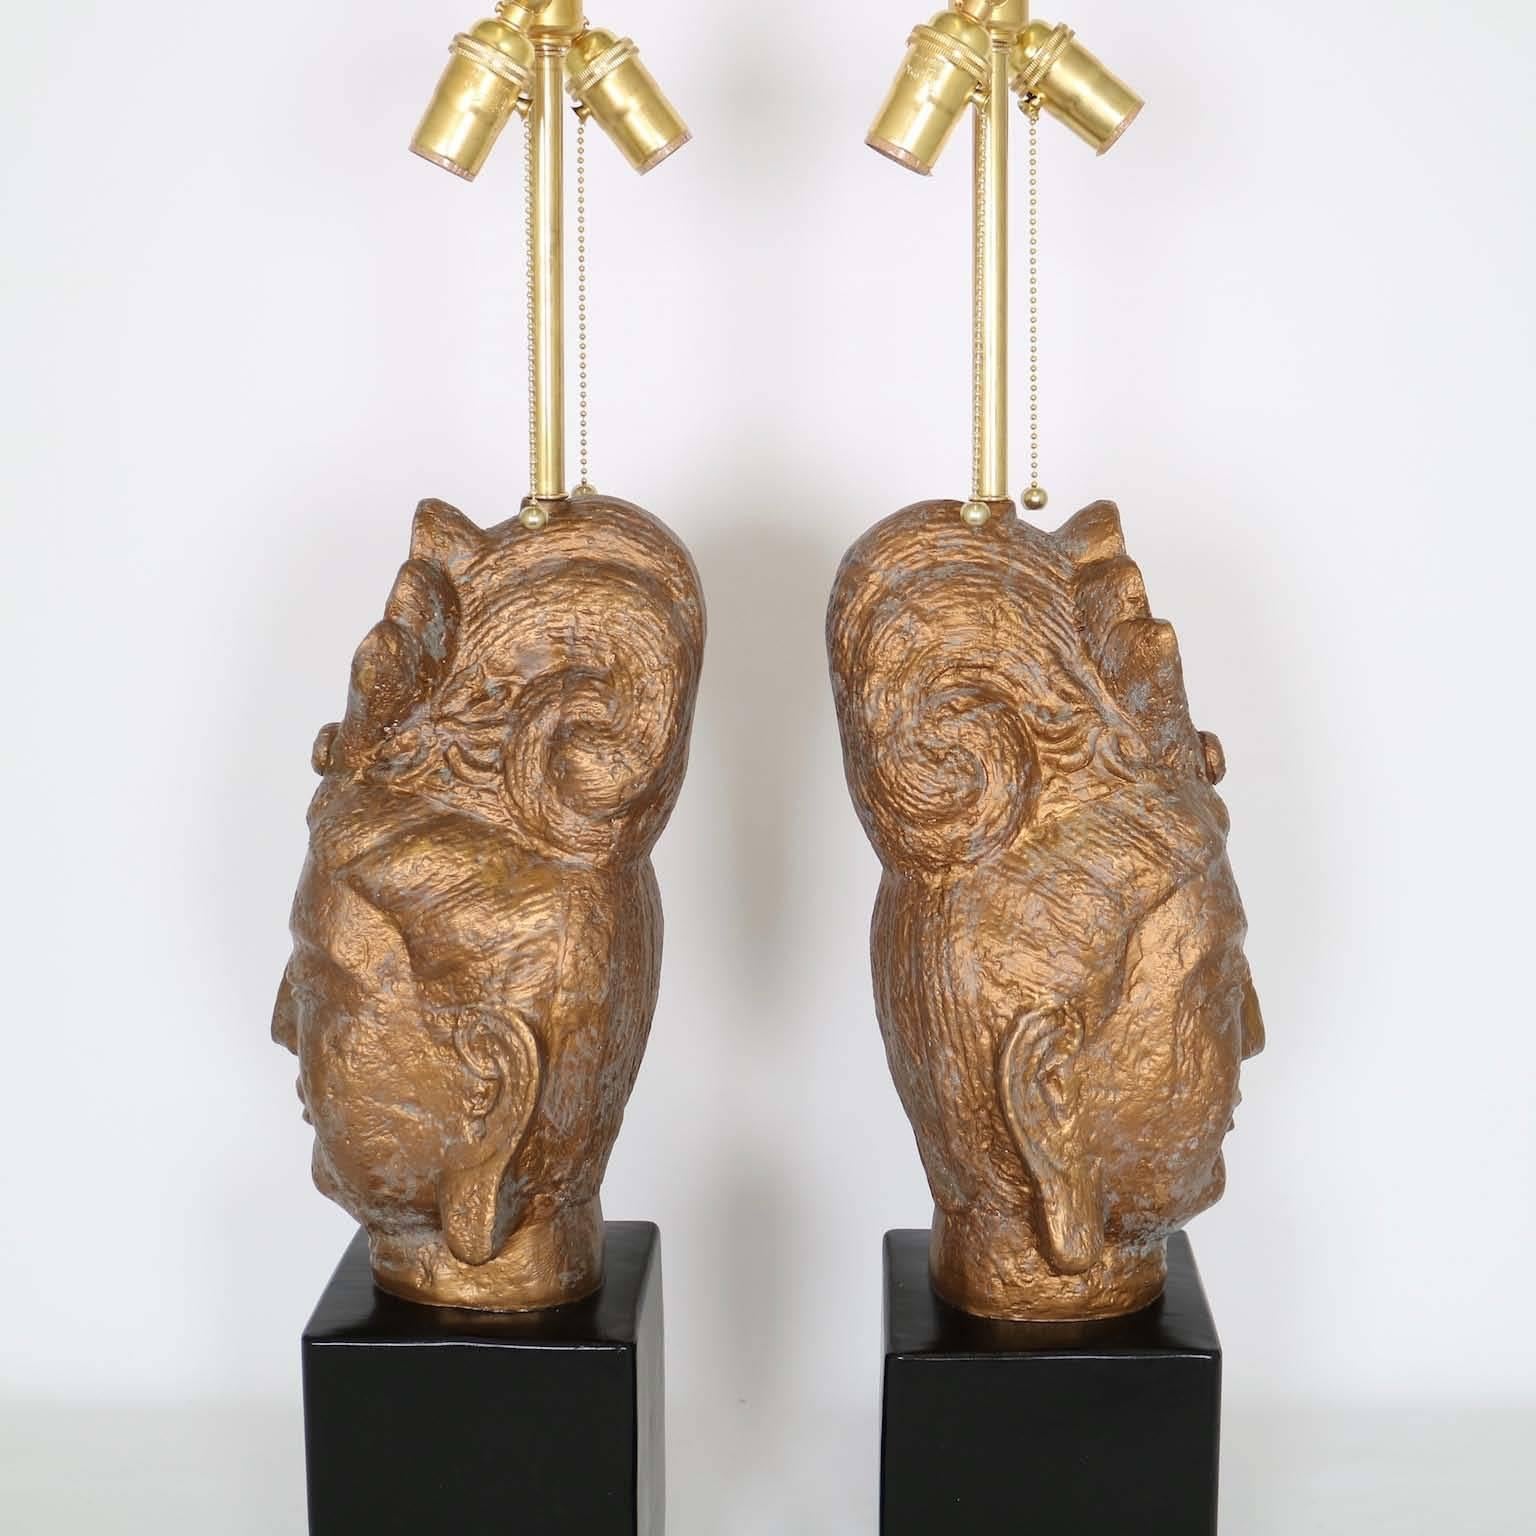 Plaster Restored Pair of James Mont Style Buddha lamps by Quartite Creative